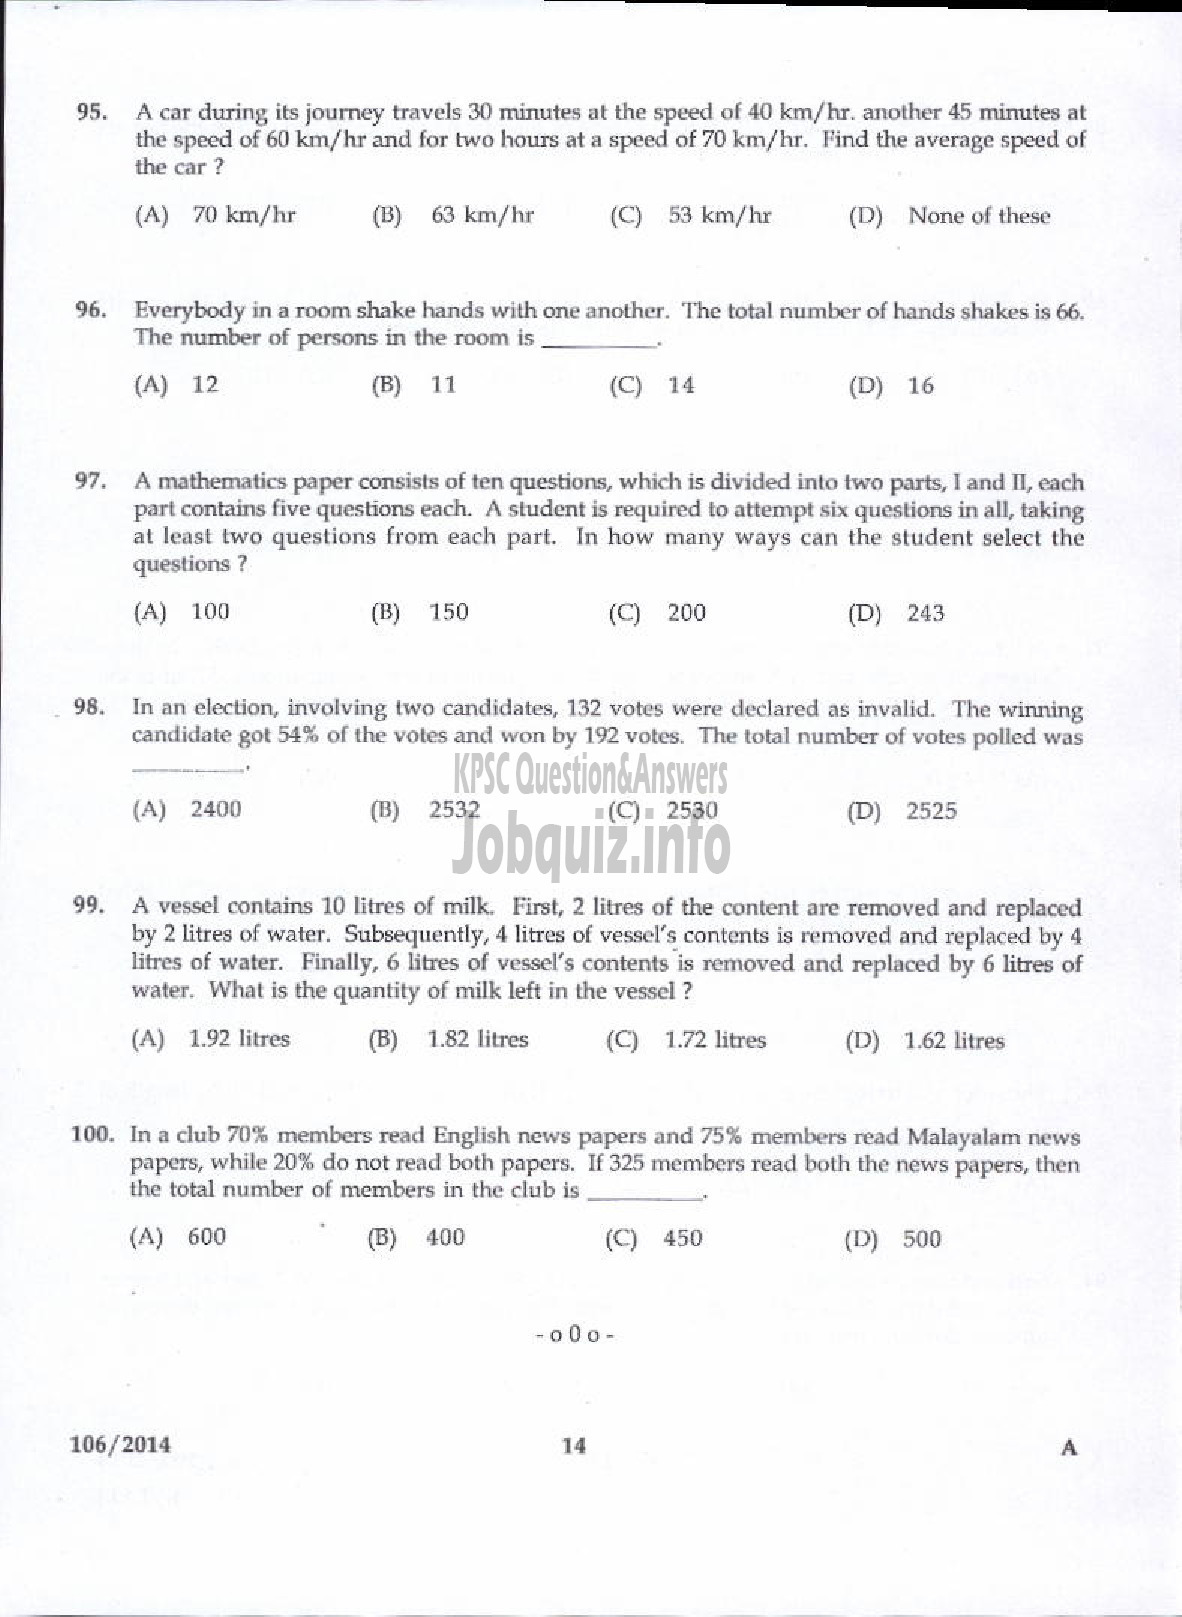 Kerala PSC Question Paper - DIVISIONAL ACCOUNTANT KERALA WATER AUTHORITY PRELIMINARY TEST-12